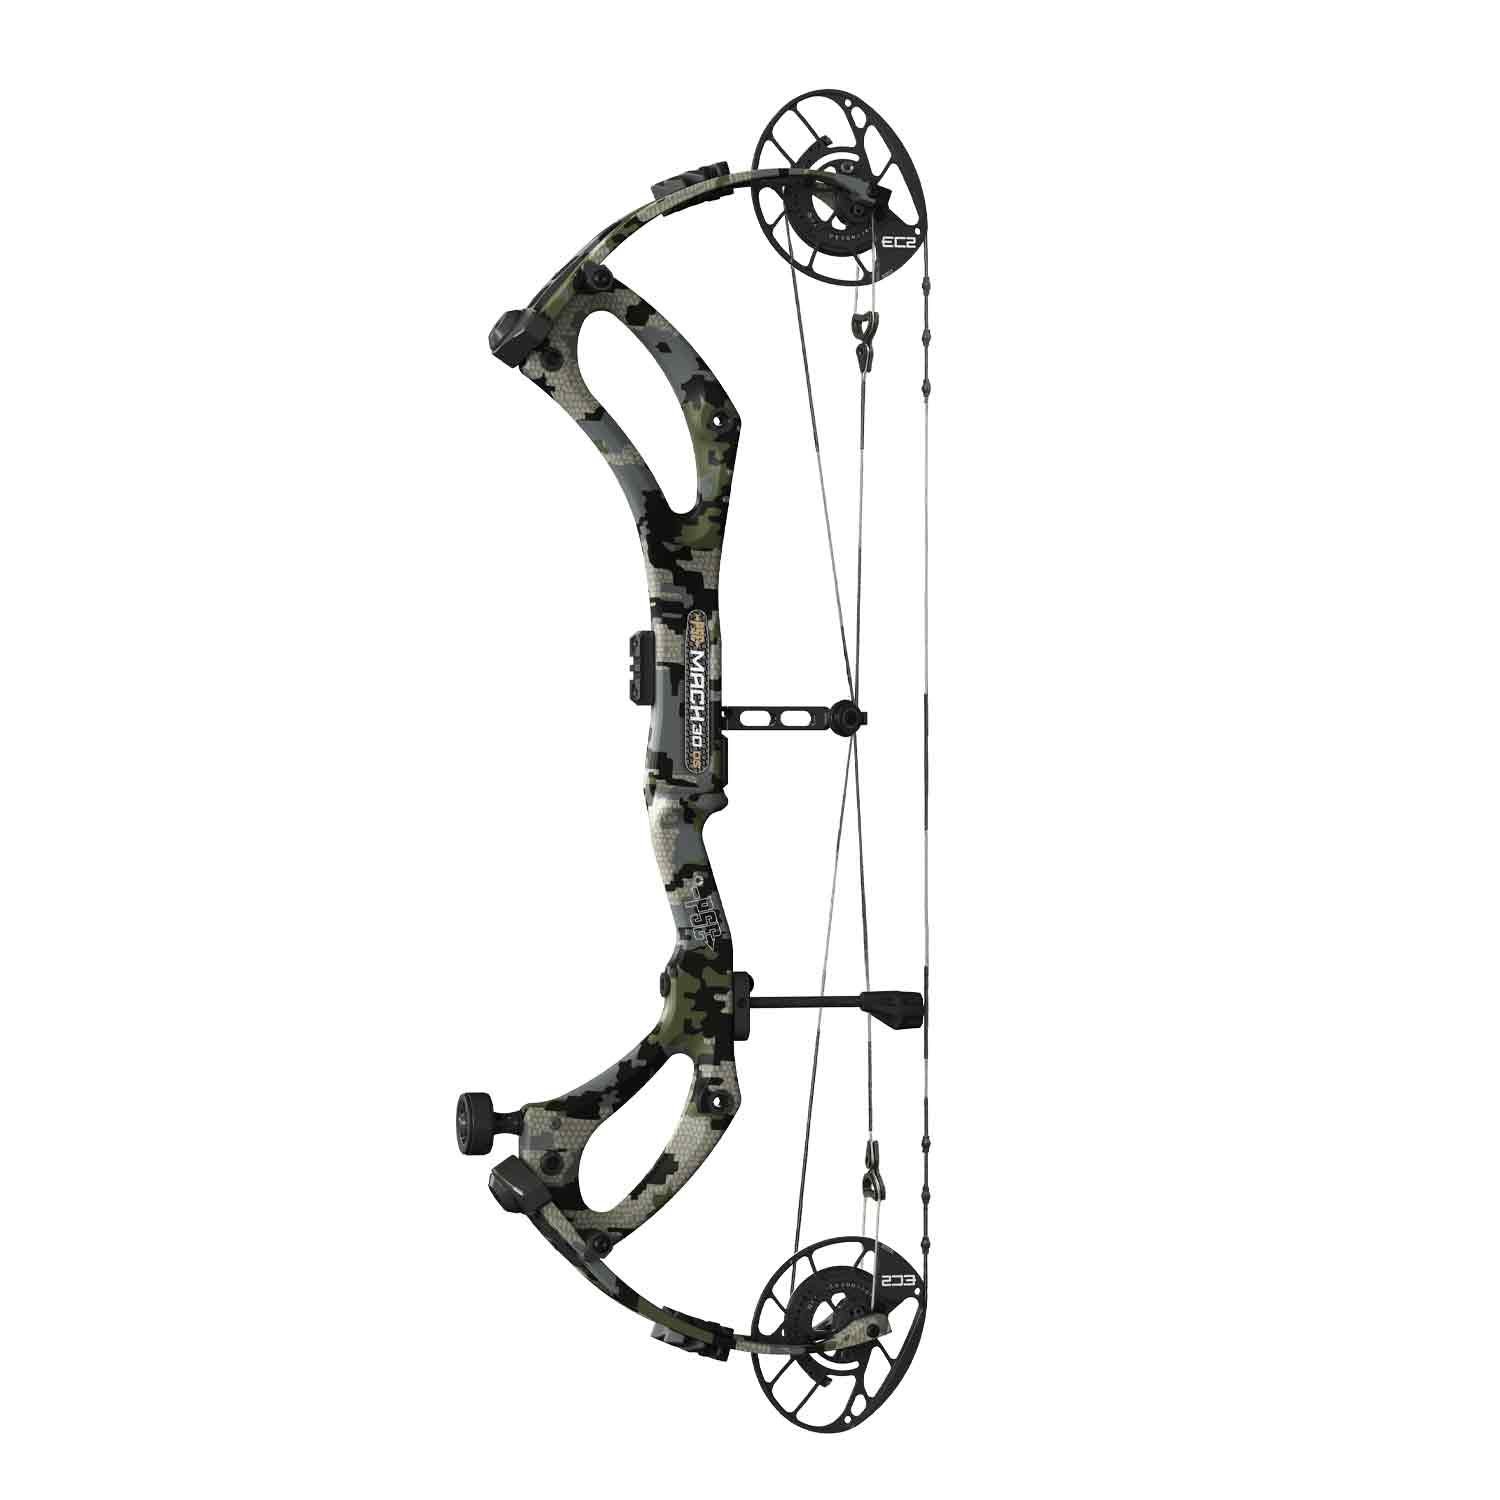 PSE Mach 30 DS Compound Hunting Bow